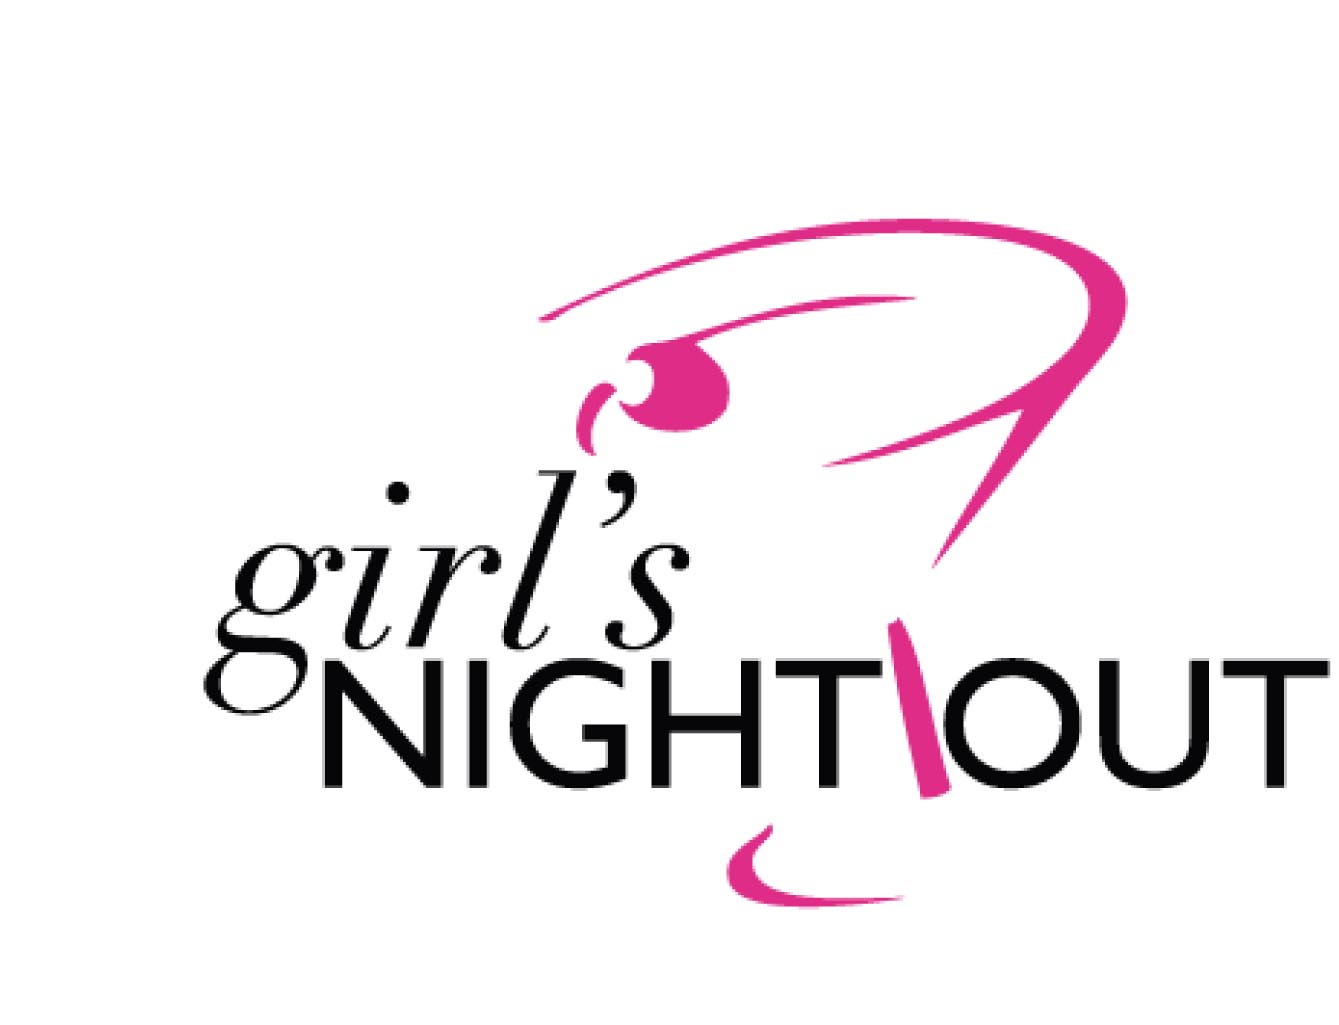 Ladies Night Out Clipart